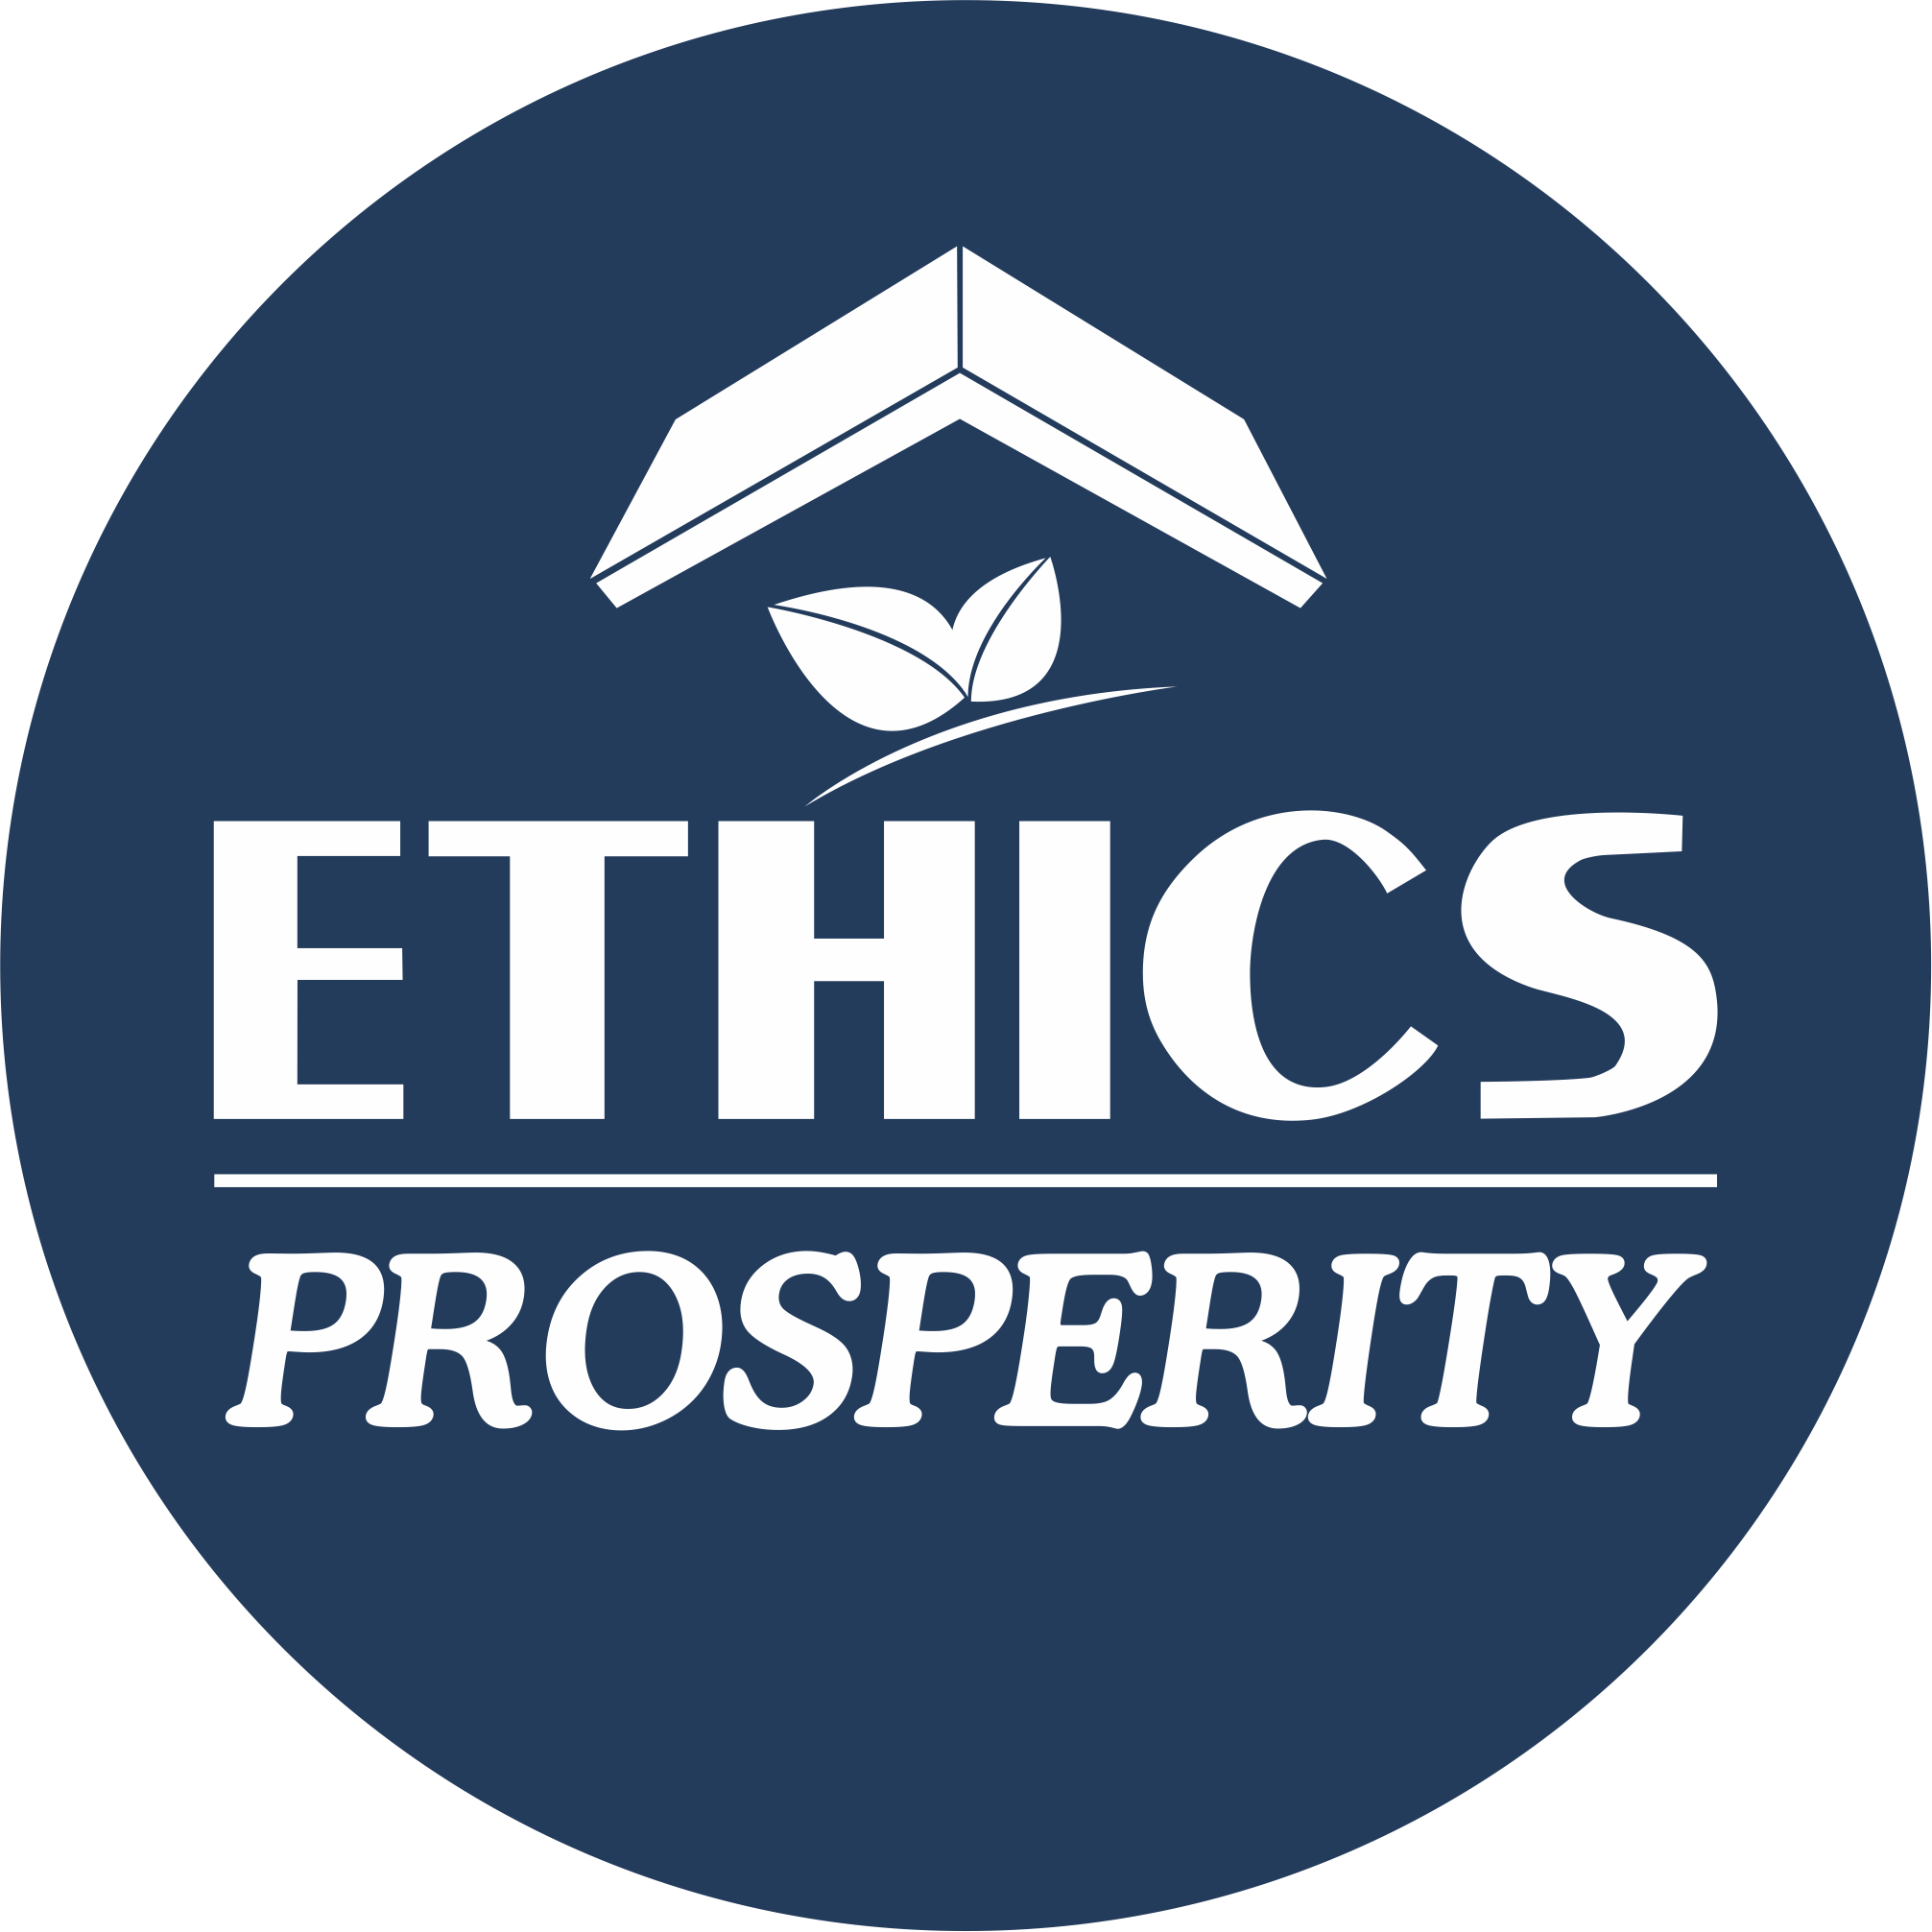 Ethics Prosperity Private Limited Logo